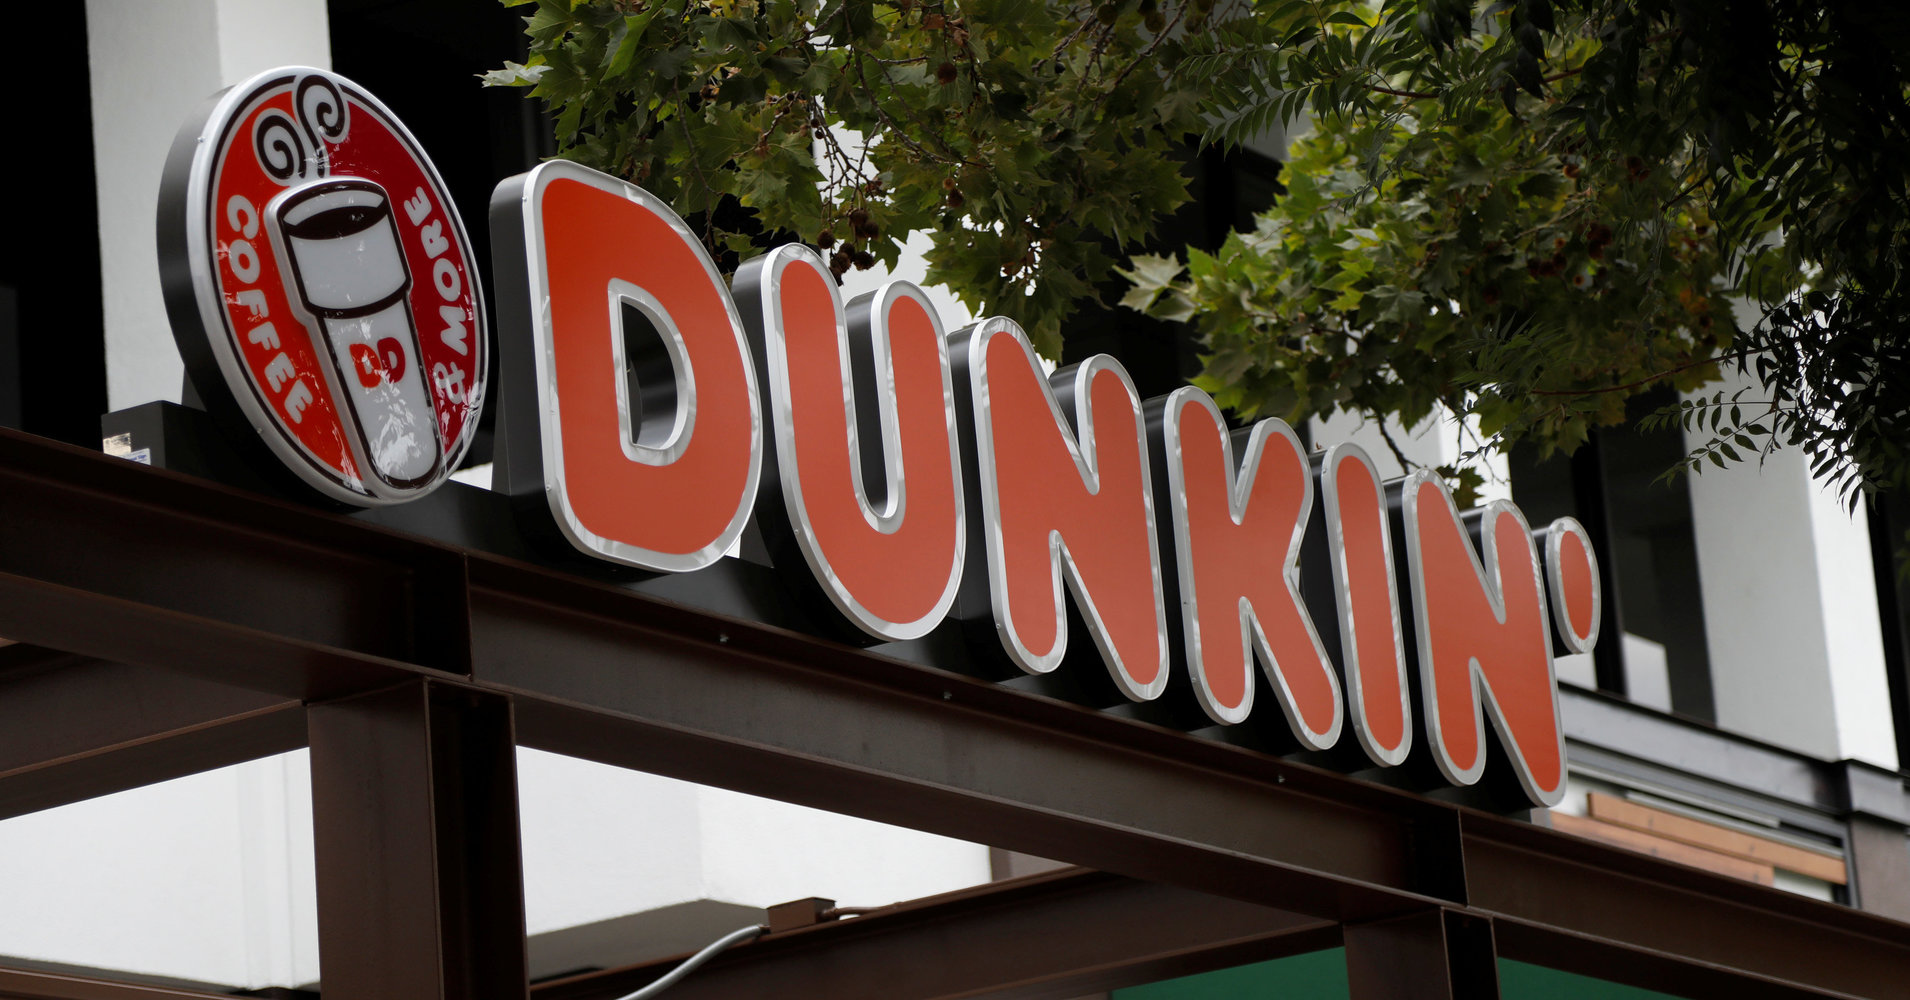 Dunkin Donuts dropping Donuts from Name - We all know them as Dunkin Donuts, but they are gonna drop the word Donuts from their name to simply Dunkin. #Dunkin #DunkinDonuts